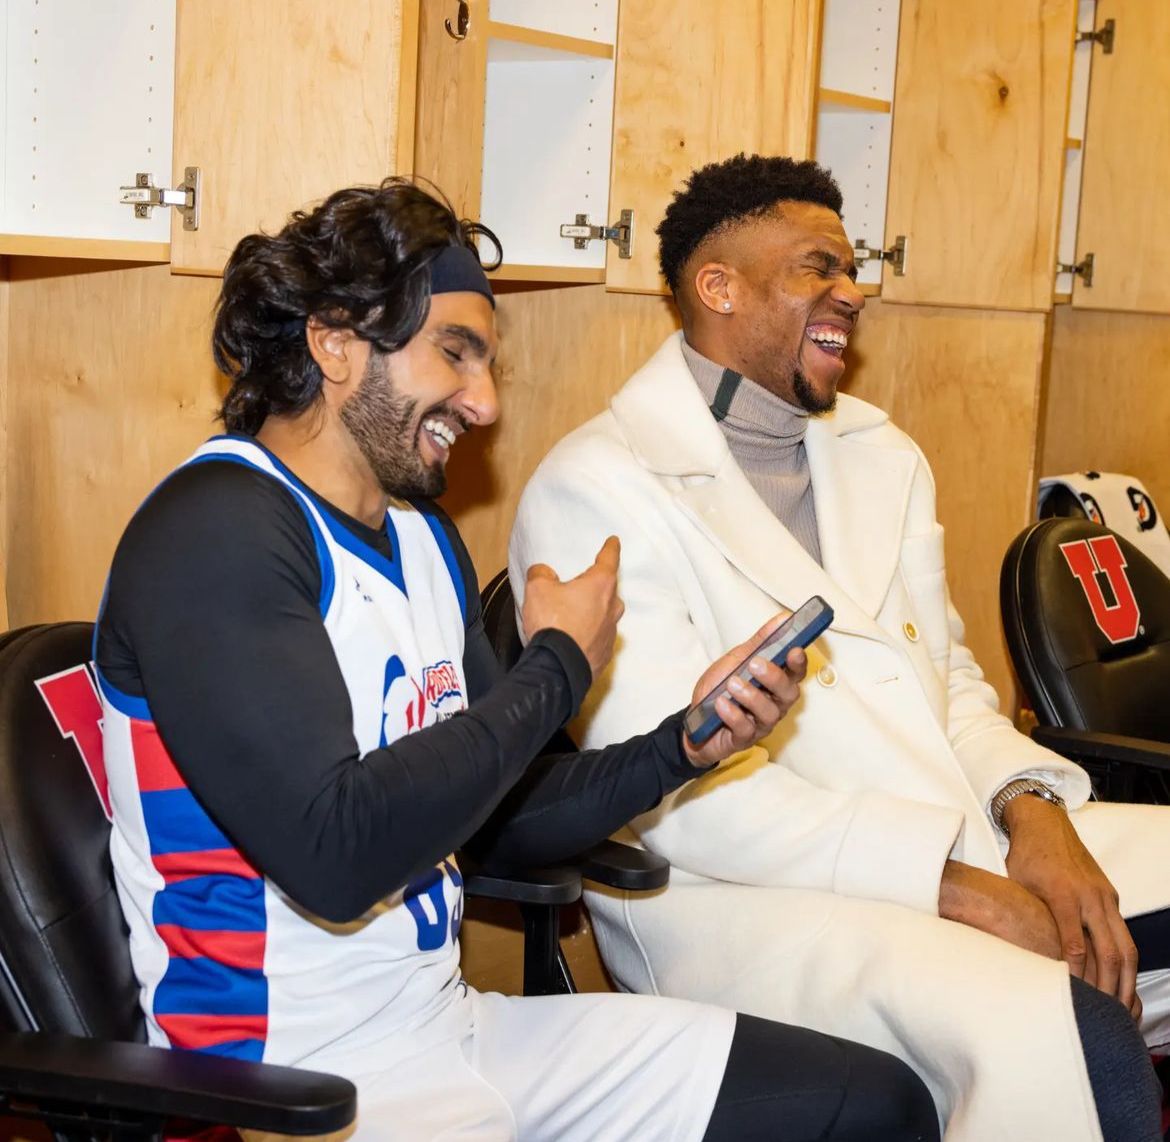 “Ranveer got the energy to our team, he was the fire,” says NBA player Giannis Ugo Antetokounmpo